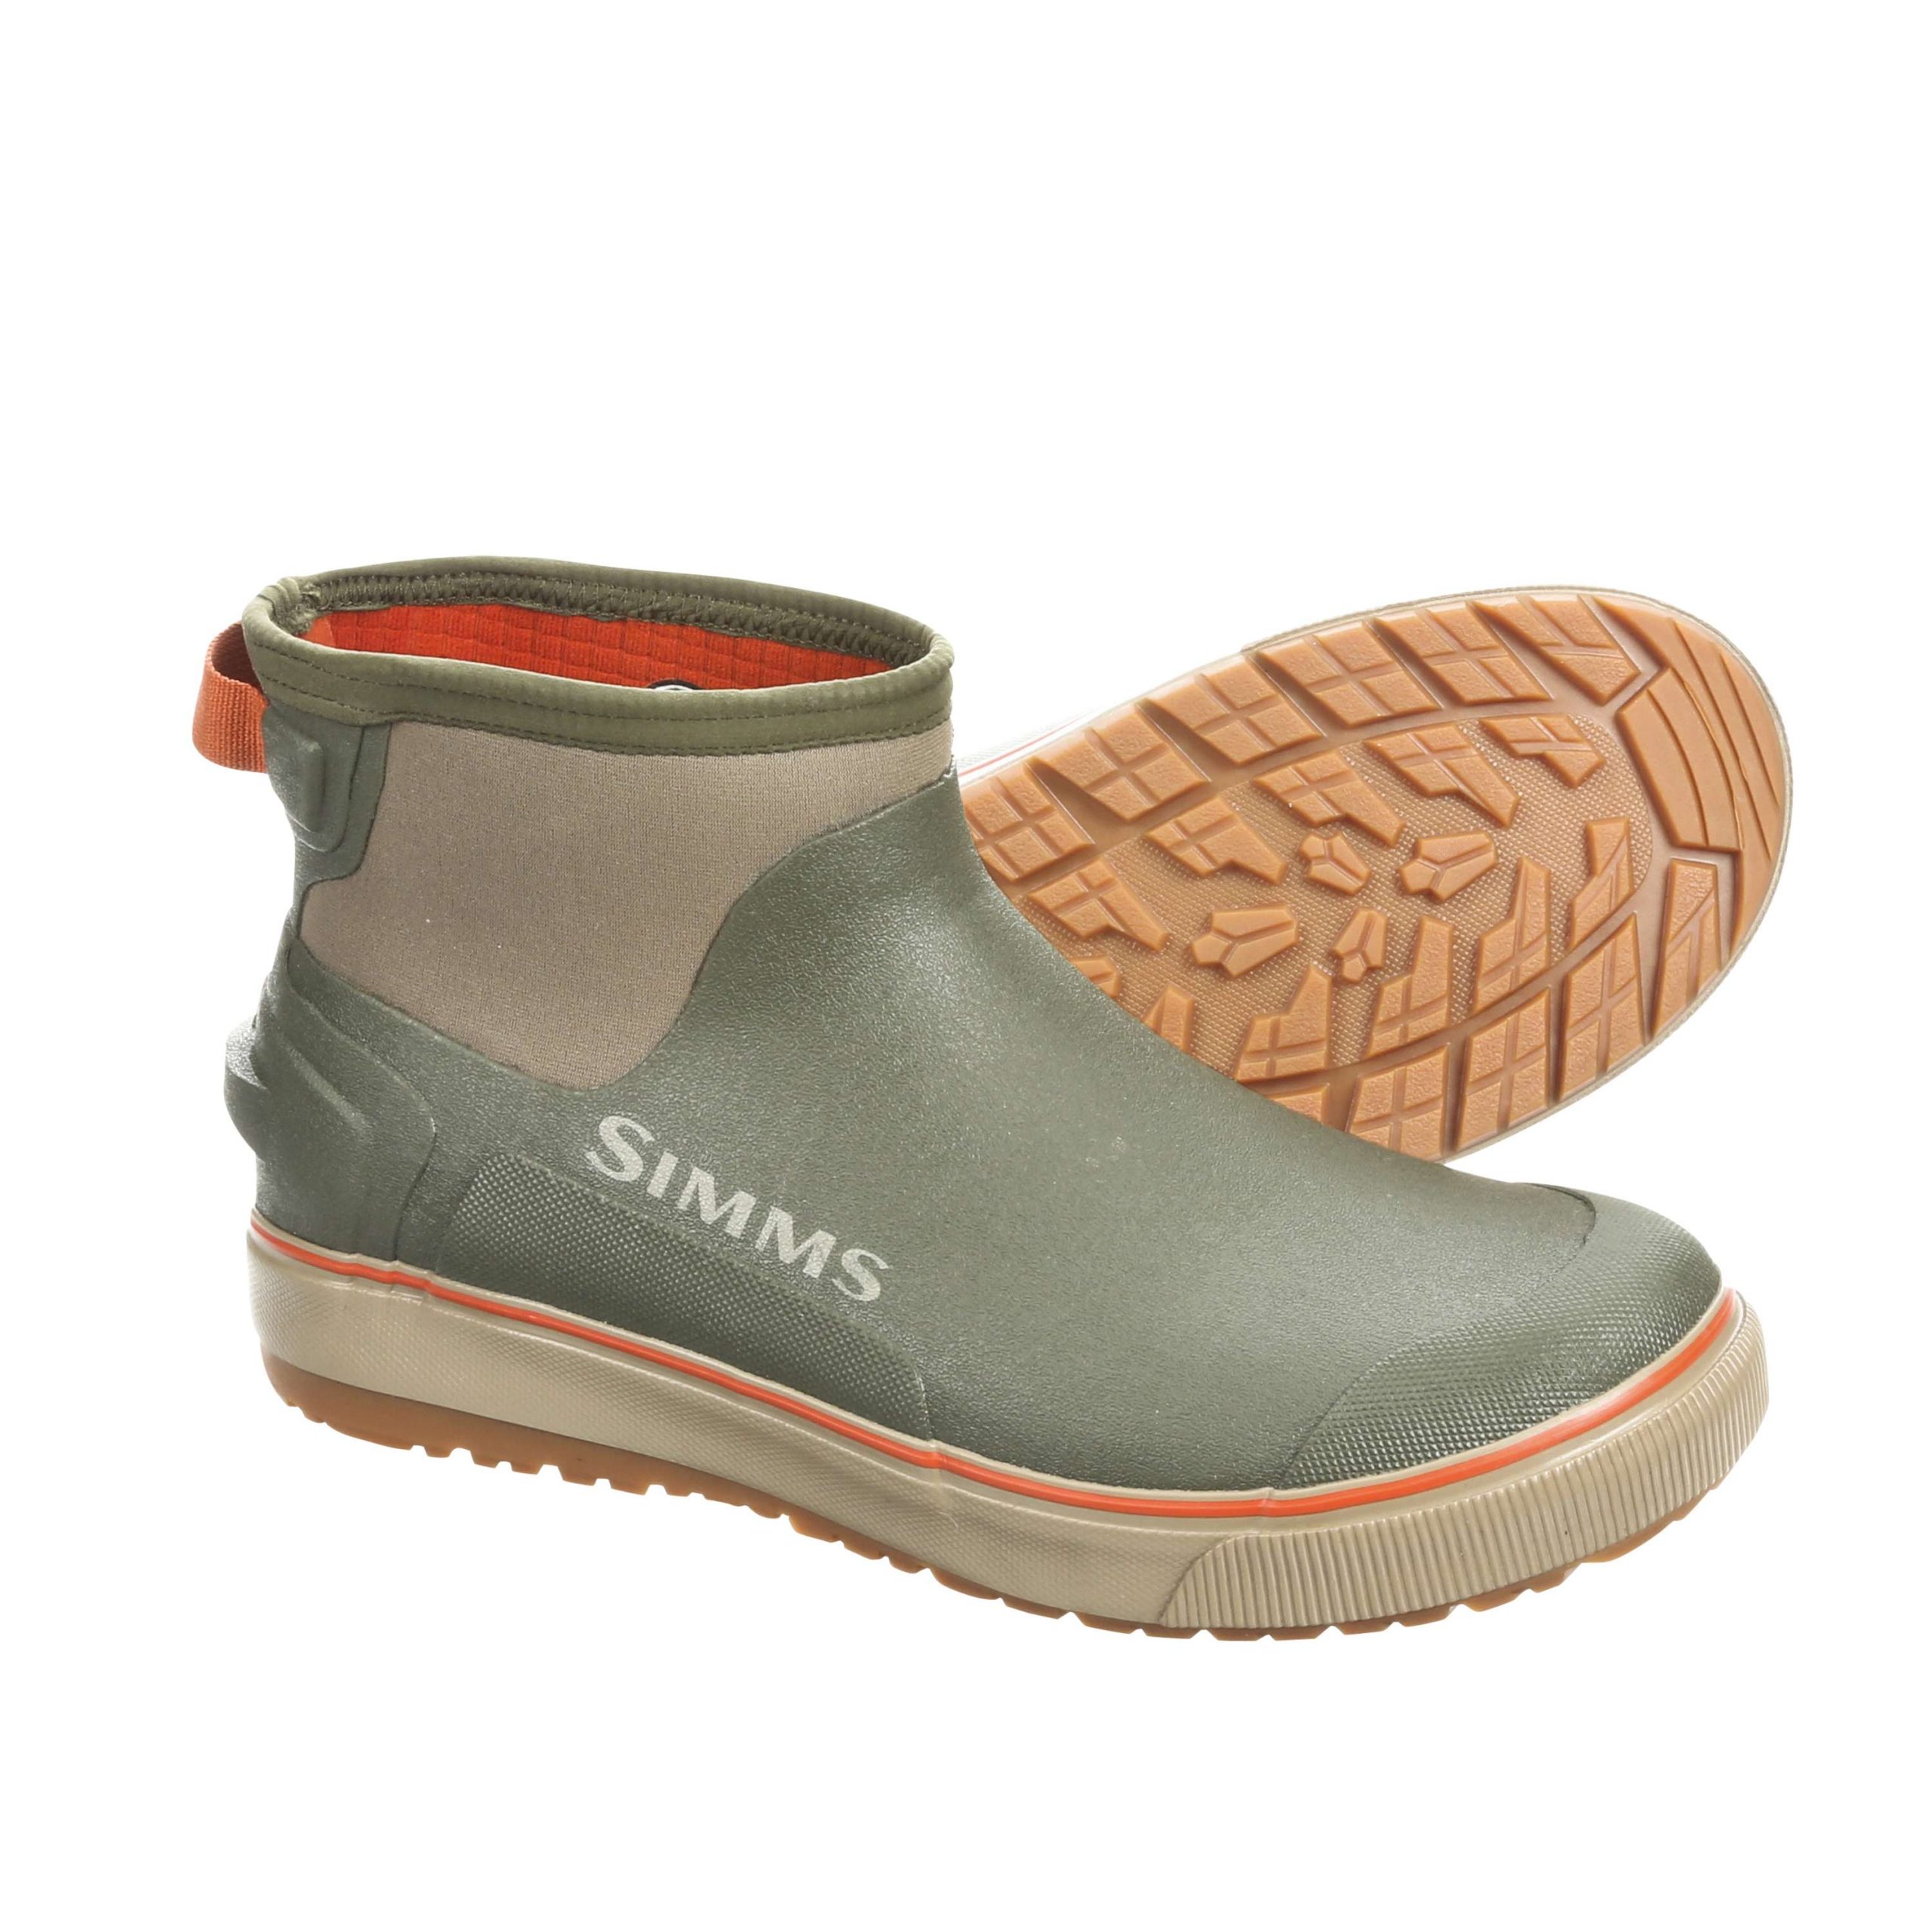 Riverbank Chukka<br>
Simms	<br>
$129<br>	
A pre/post/ or mid-fishing chukka with an off-road, all weather chassis. Constructed out of waterproof vulcanized rubber & neoprene, the Riverbank Chukka sports a grid-fleece lining to keep feet ultra-warm on cold whether they are in the river or on land. Powered by a Right AngleÂ® Footbed and featuring a non-marking, siped outsole, anglers achieve unmatched comfort, stability and traction in what is sure to become an angler driven go-to piece of footwear.	